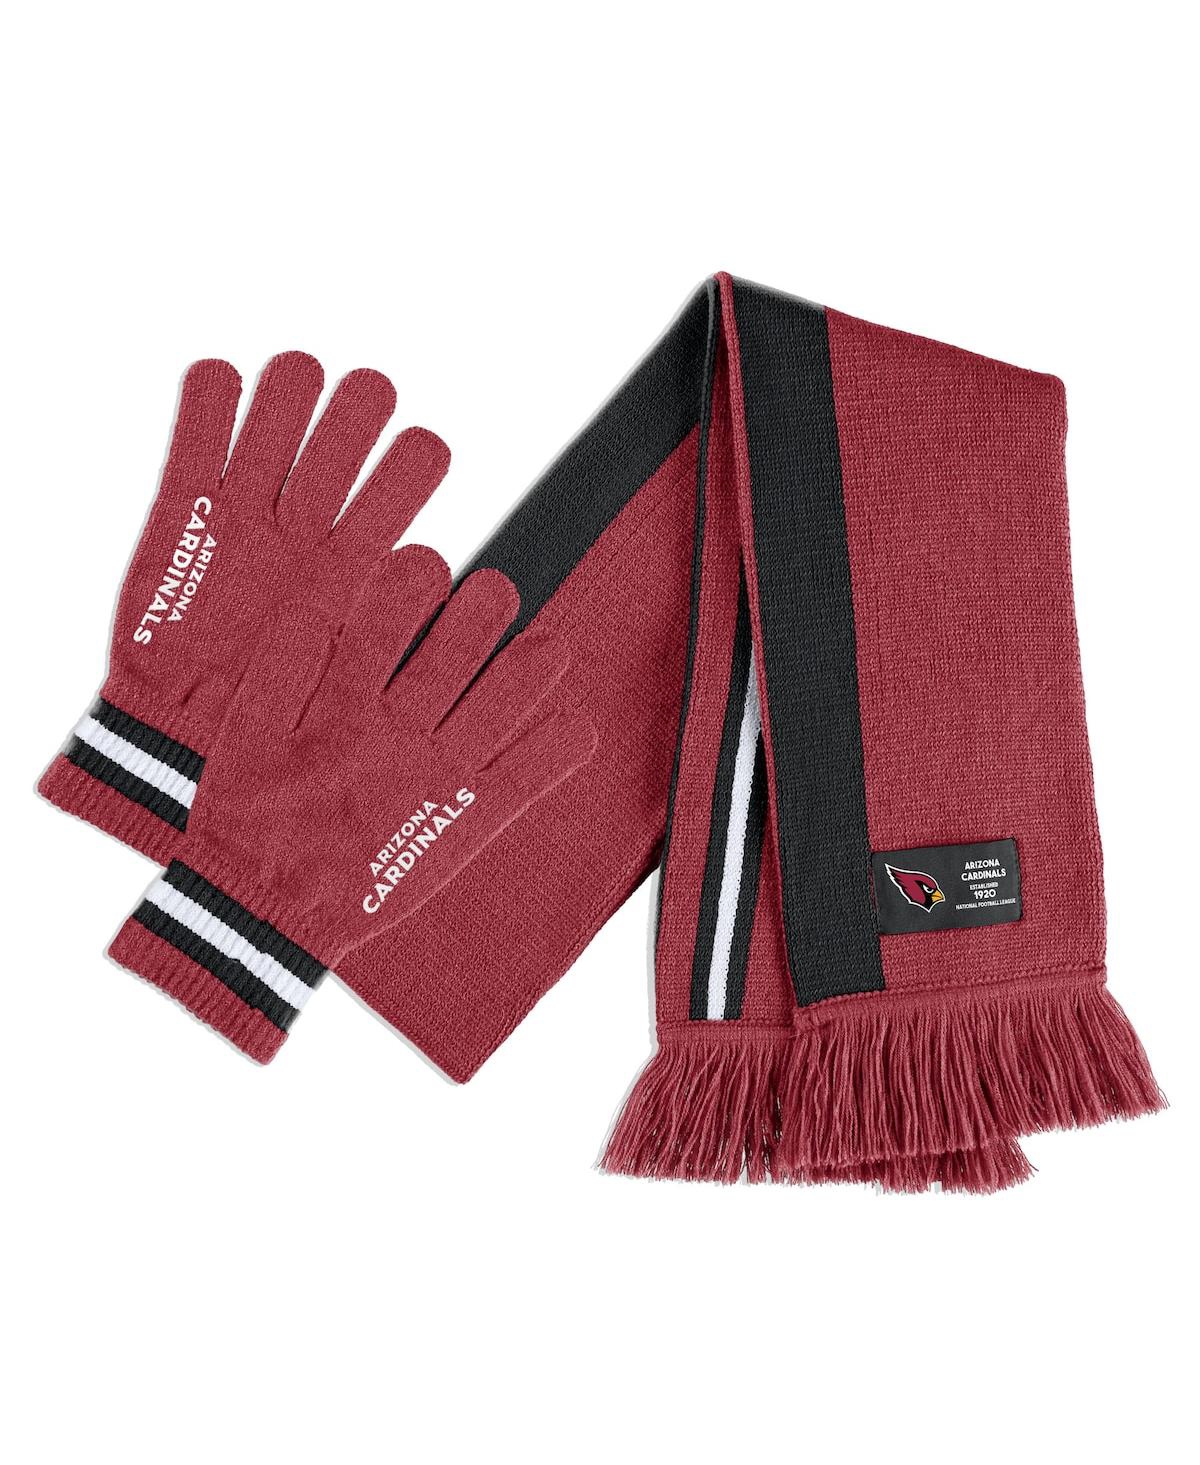 Women's Wear by Erin Andrews Arizona Cardinals Scarf and Glove Set - Red, Black